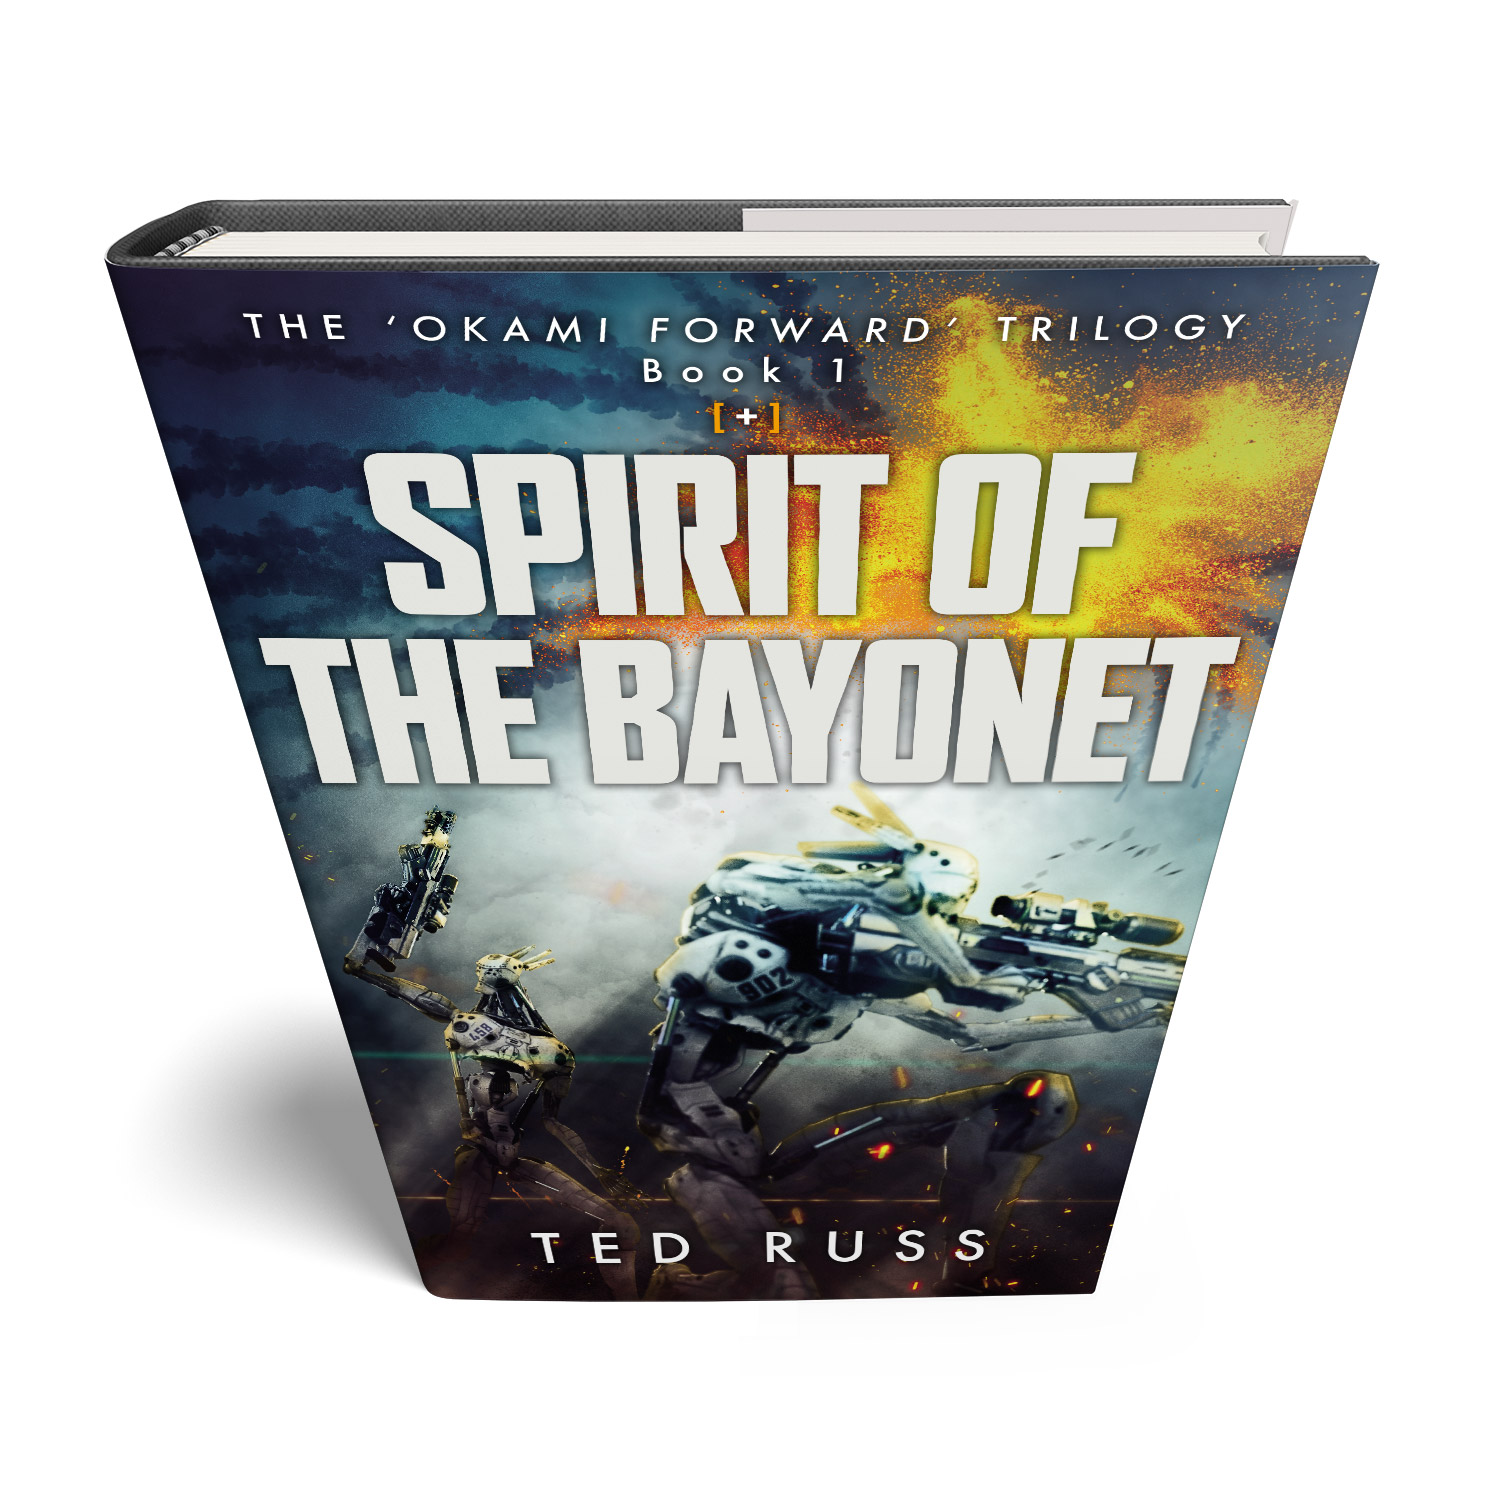 The 'Okami Forward' Trilogy is a spectacular scifi series by author Ted Russ. The cover design and interior manuscript formatting are by Mark Thomas. Learn what Mark could do for your book by visiting coverness.com.